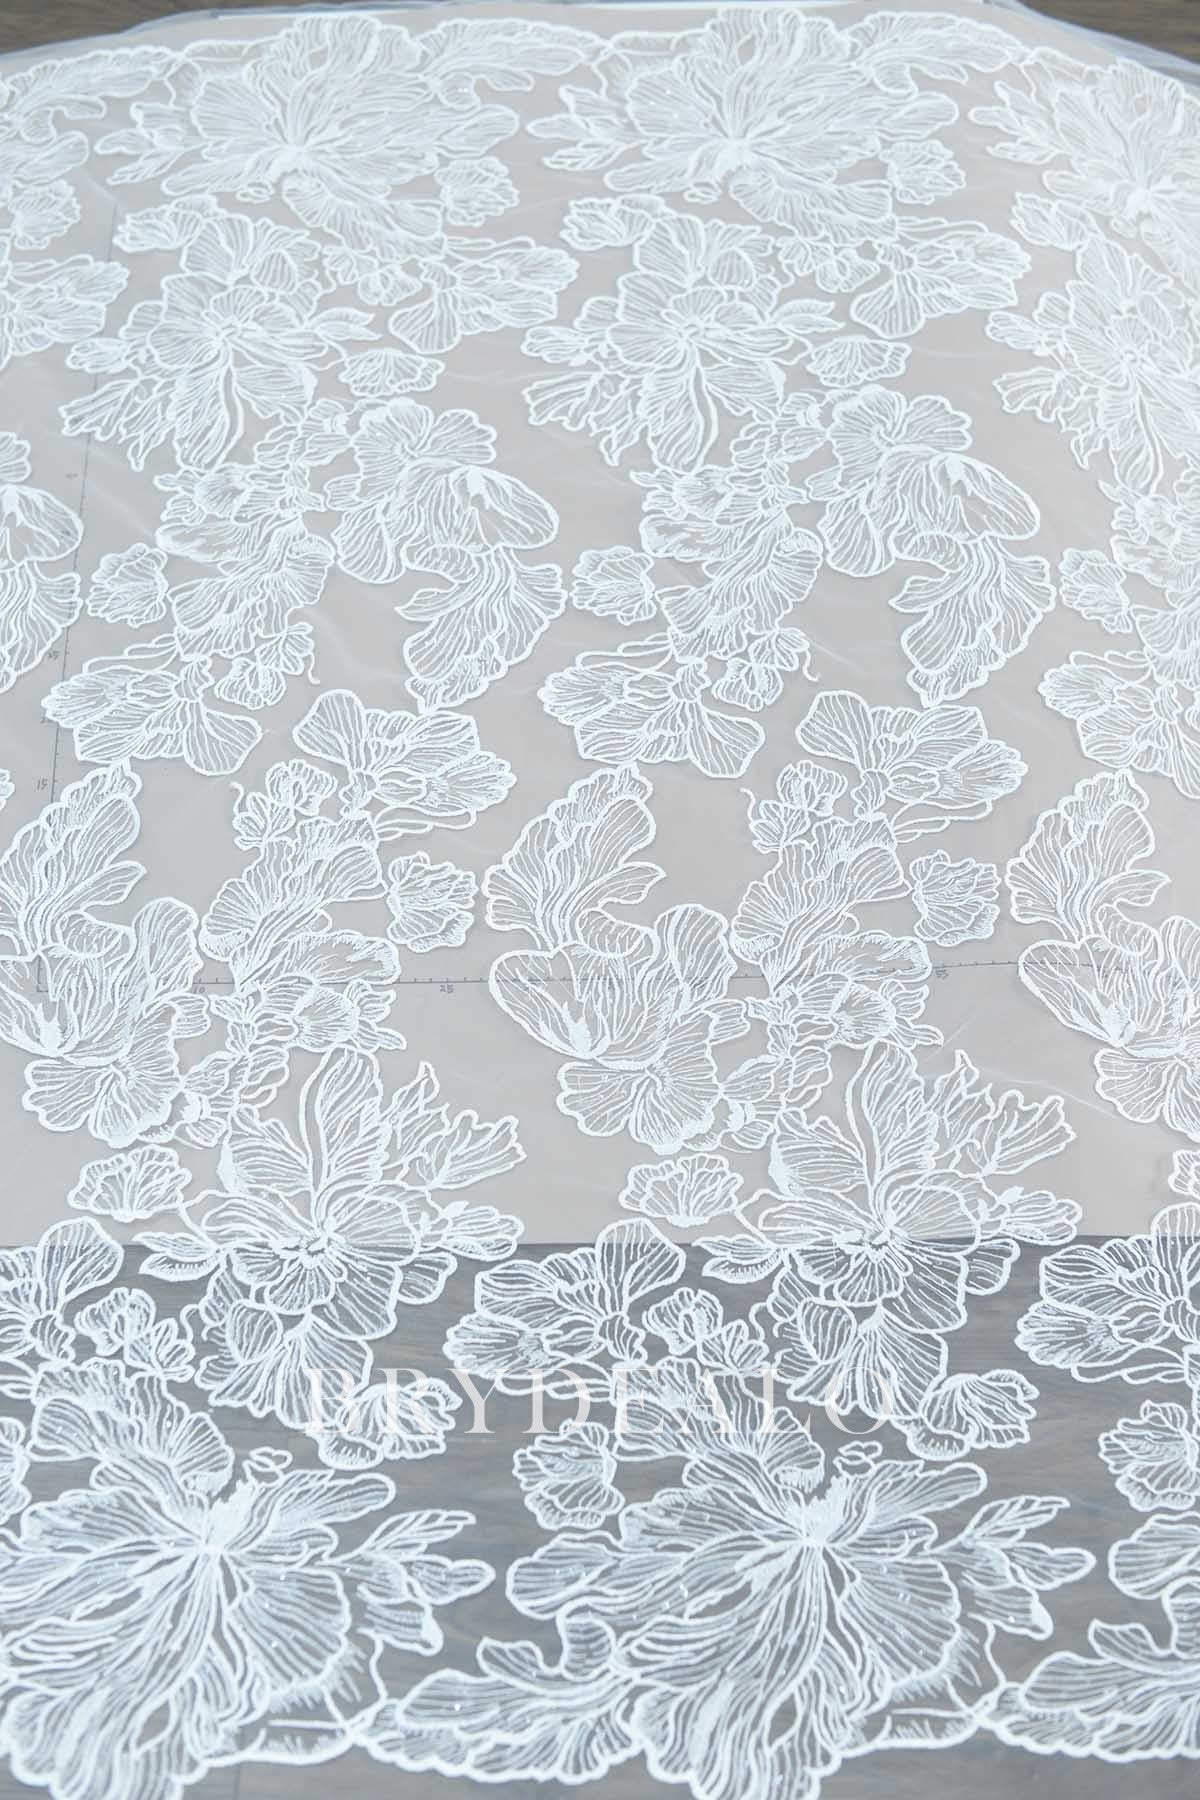 Designer Shimmery Lotus Embroidered Bridal Lace Fabric